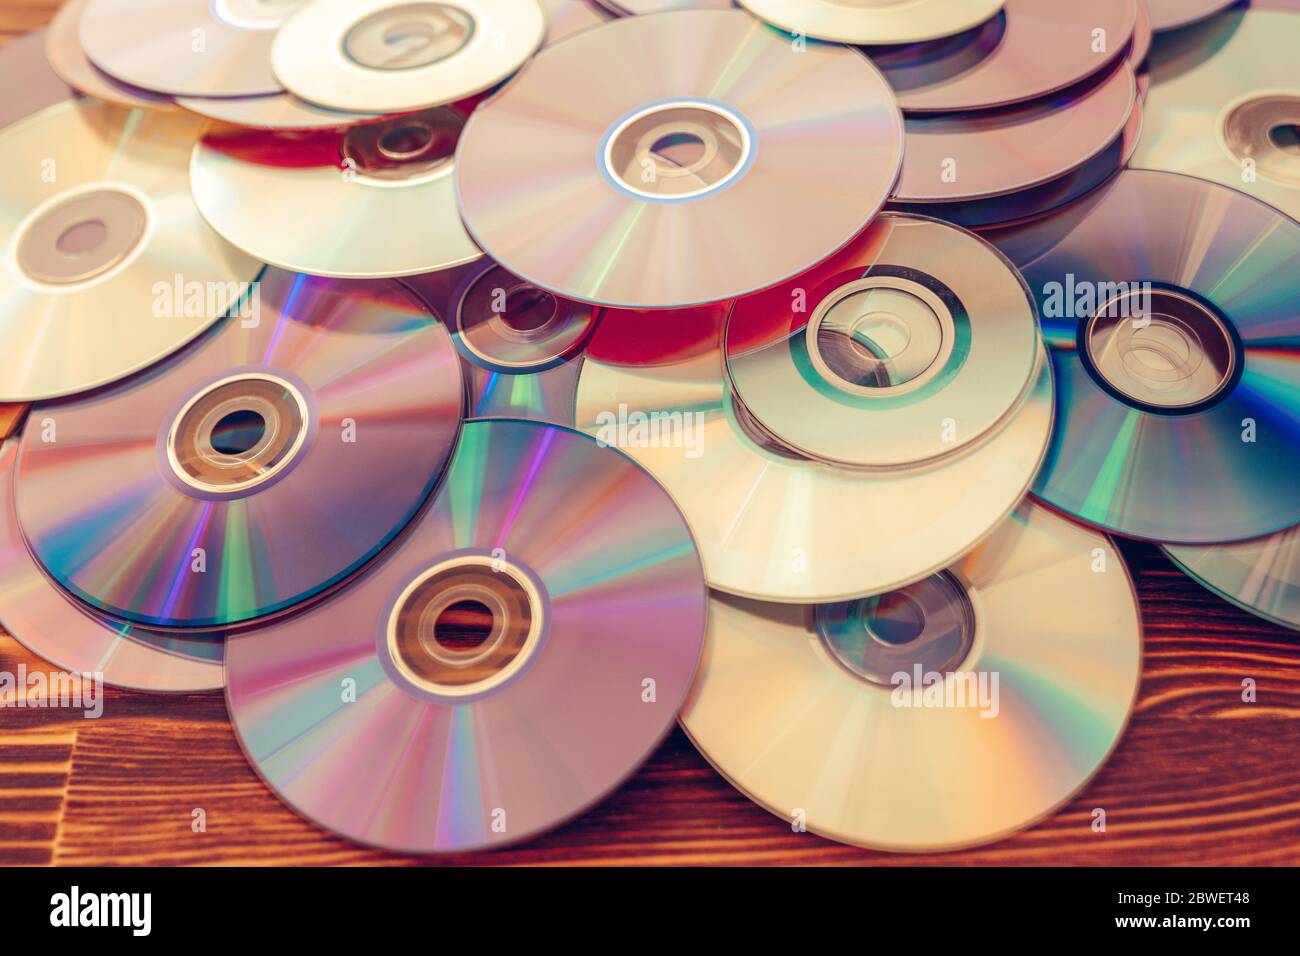 Old technology, waste compact disc collection decoration for vintage pattern. cd background concept Stock Photo